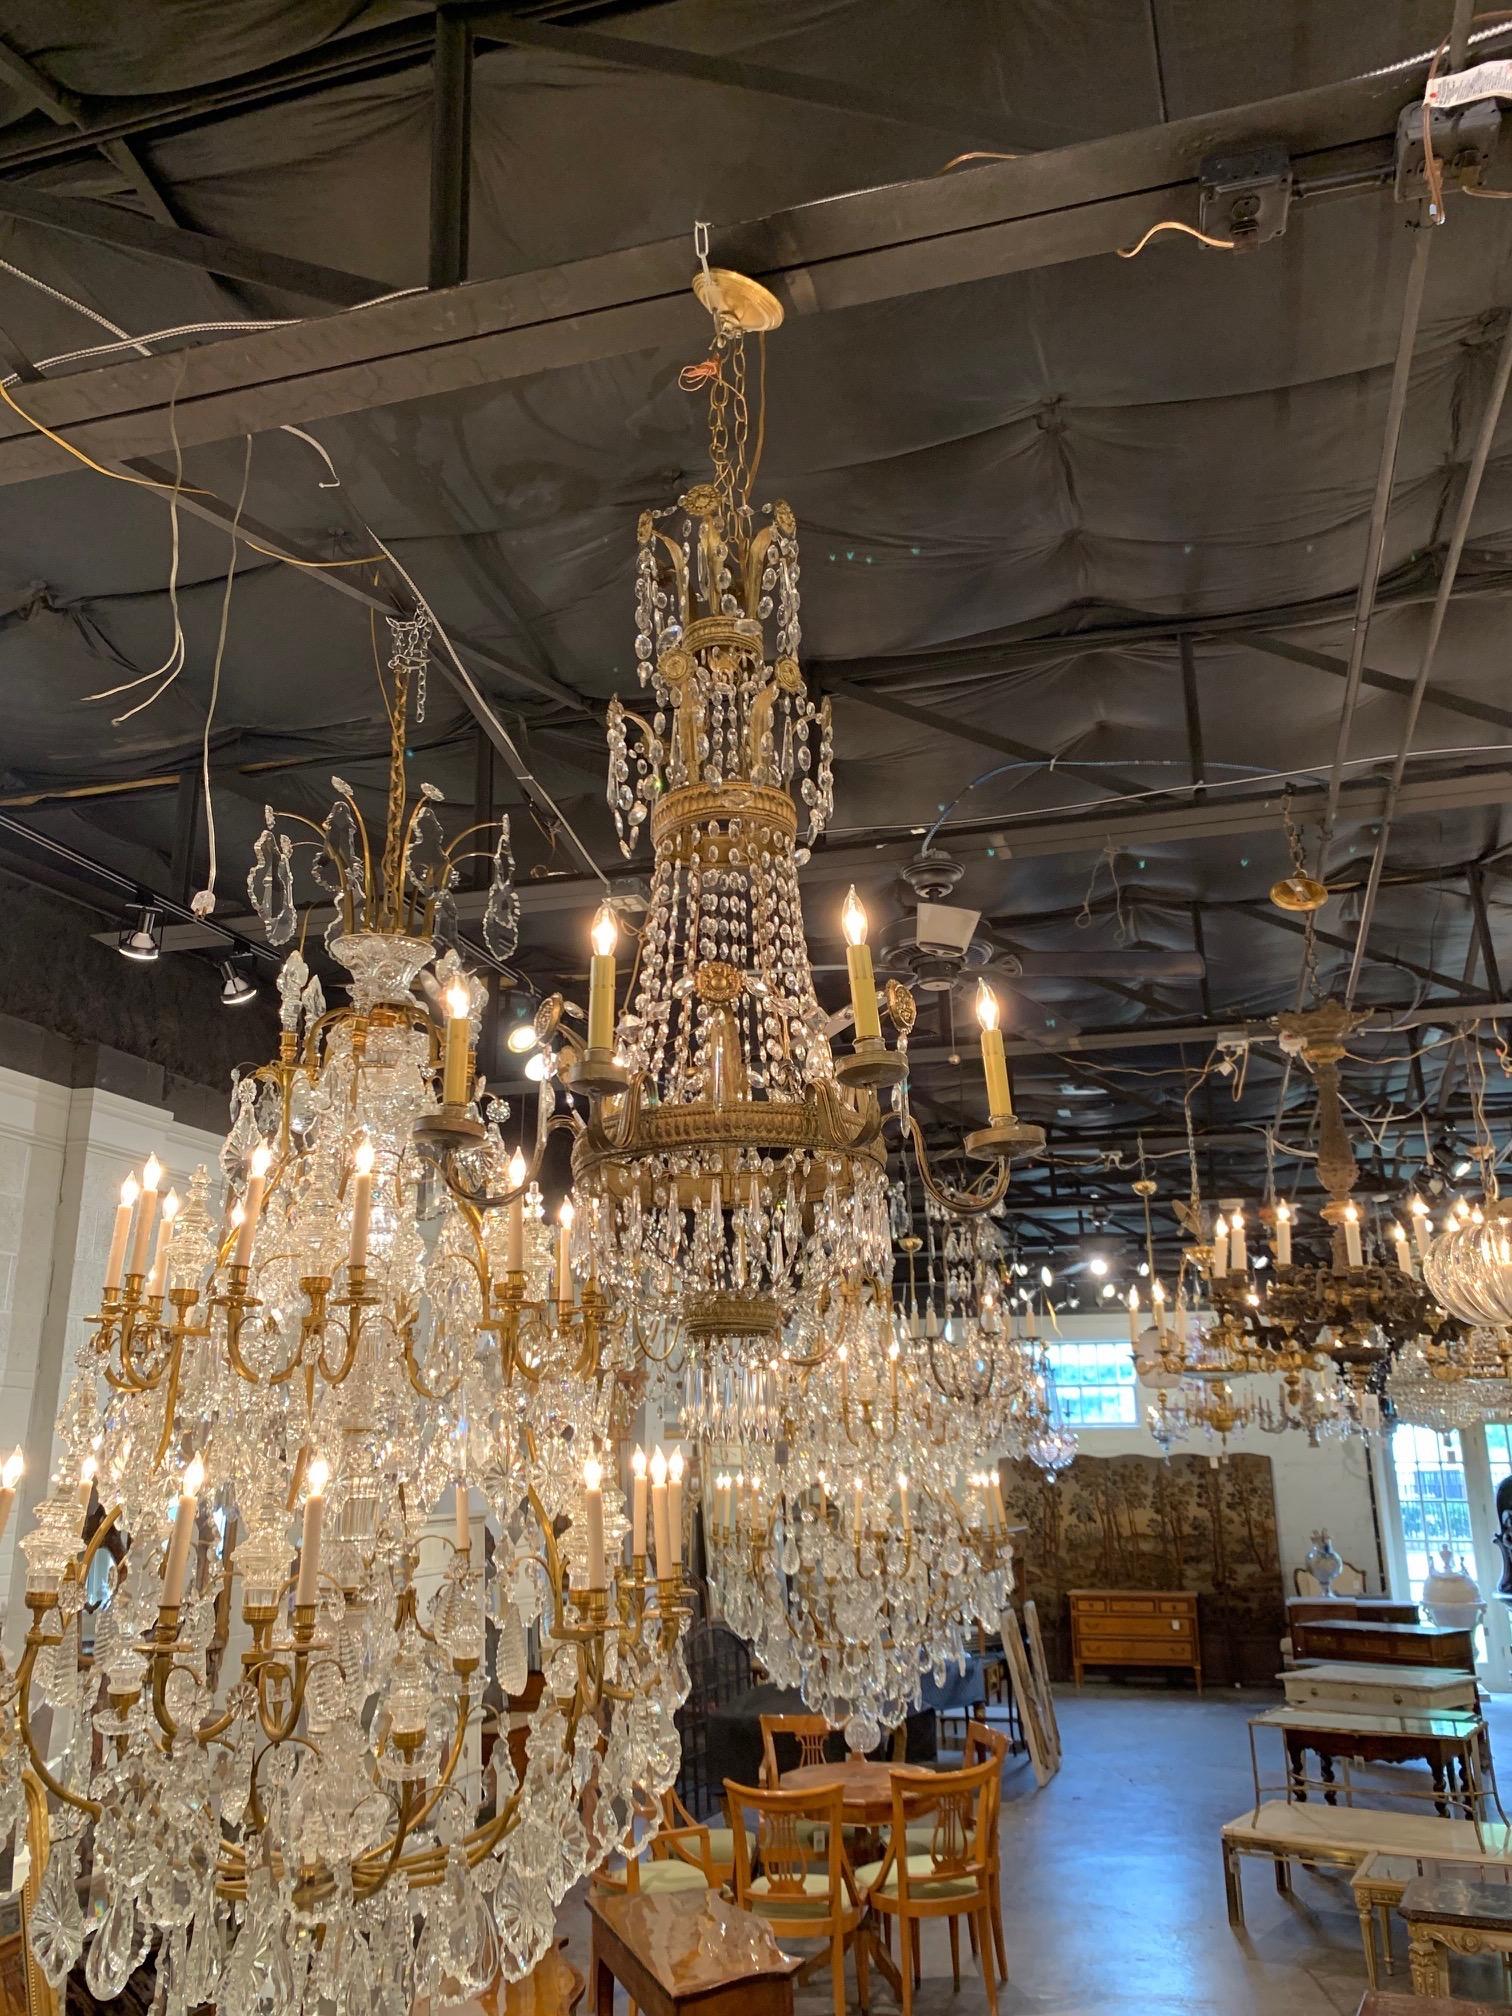 Fabulous 18th century Italian Tuscan beaded crystal tole chandelier with 6-light. This fixture has a beautiful scale and shape and is glistening with beads and crystals. Tole structure has gorgeous decorative elements as well. Stunning!